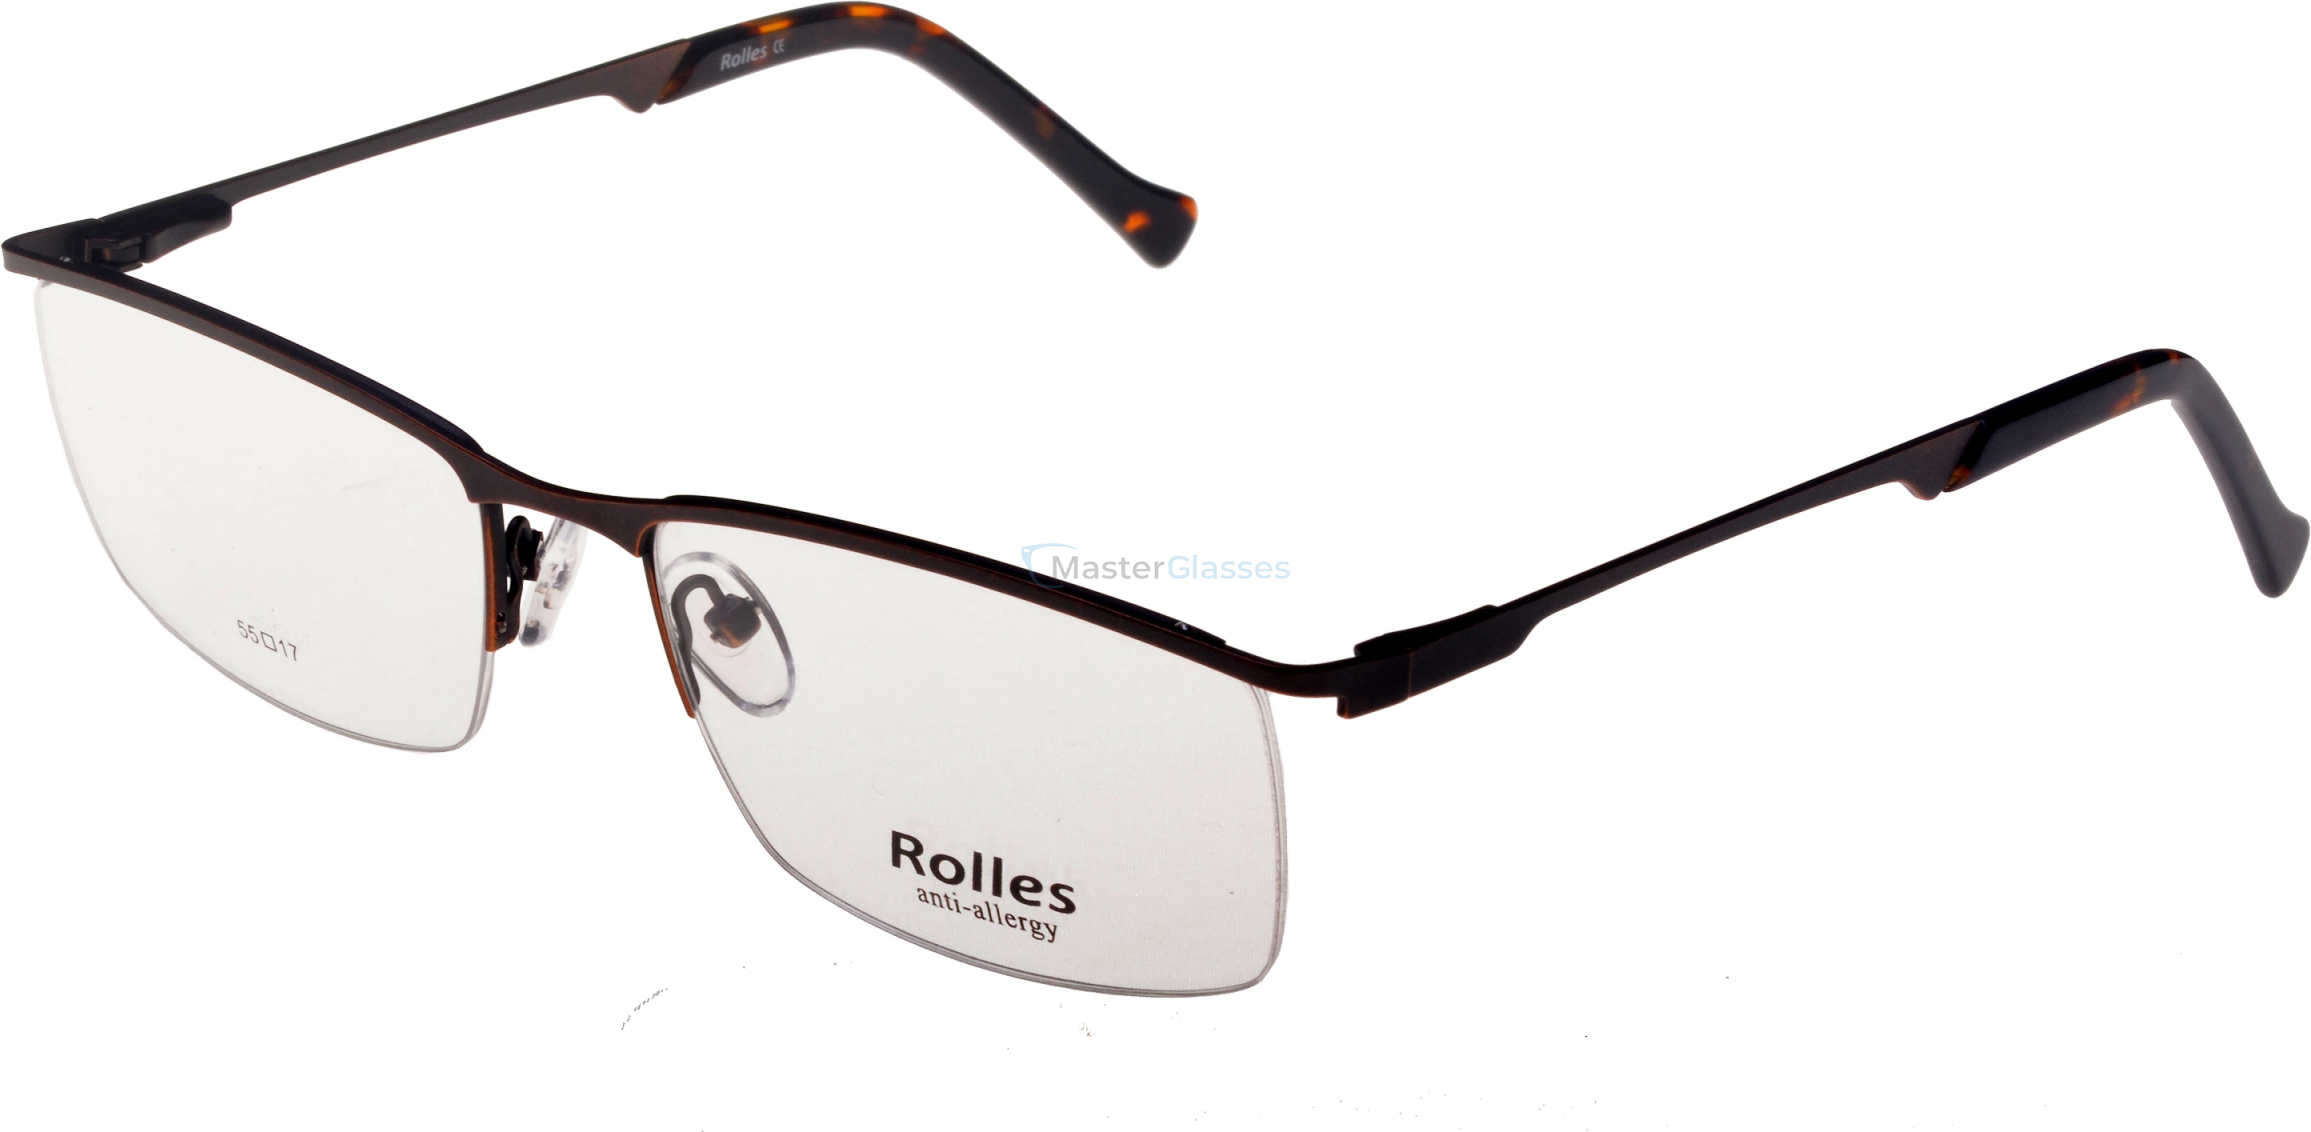  Rolles 657 01